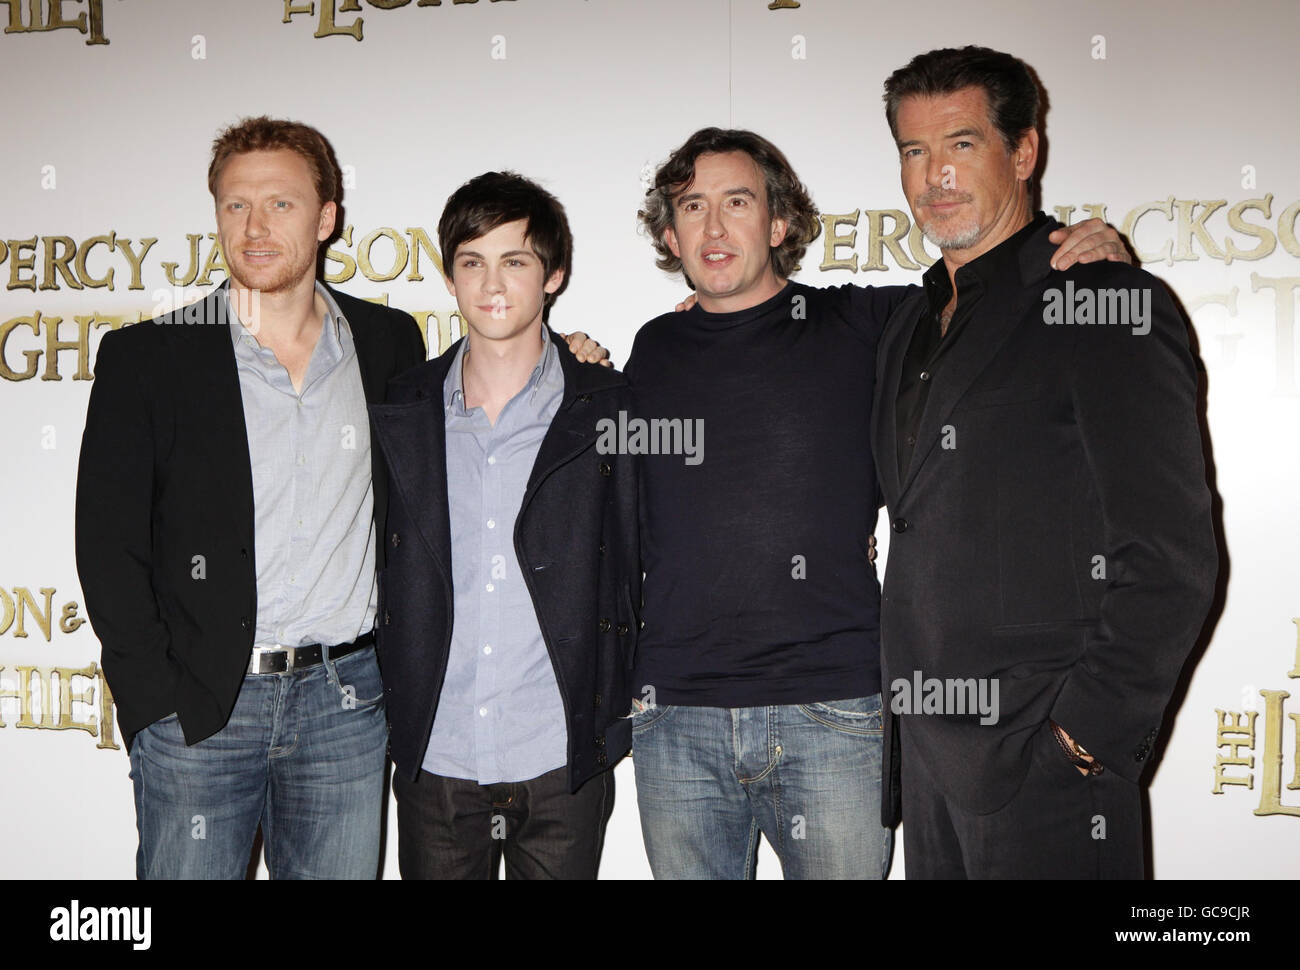 The cast of the film (left to right) Kevin McKidd, Logan Lerman, Steve Coogan and Pierce Brosnan during a photocall for the film Percy Jackson and the Lightning Thief, at the Dorchester Hotel in central London. Stock Photo